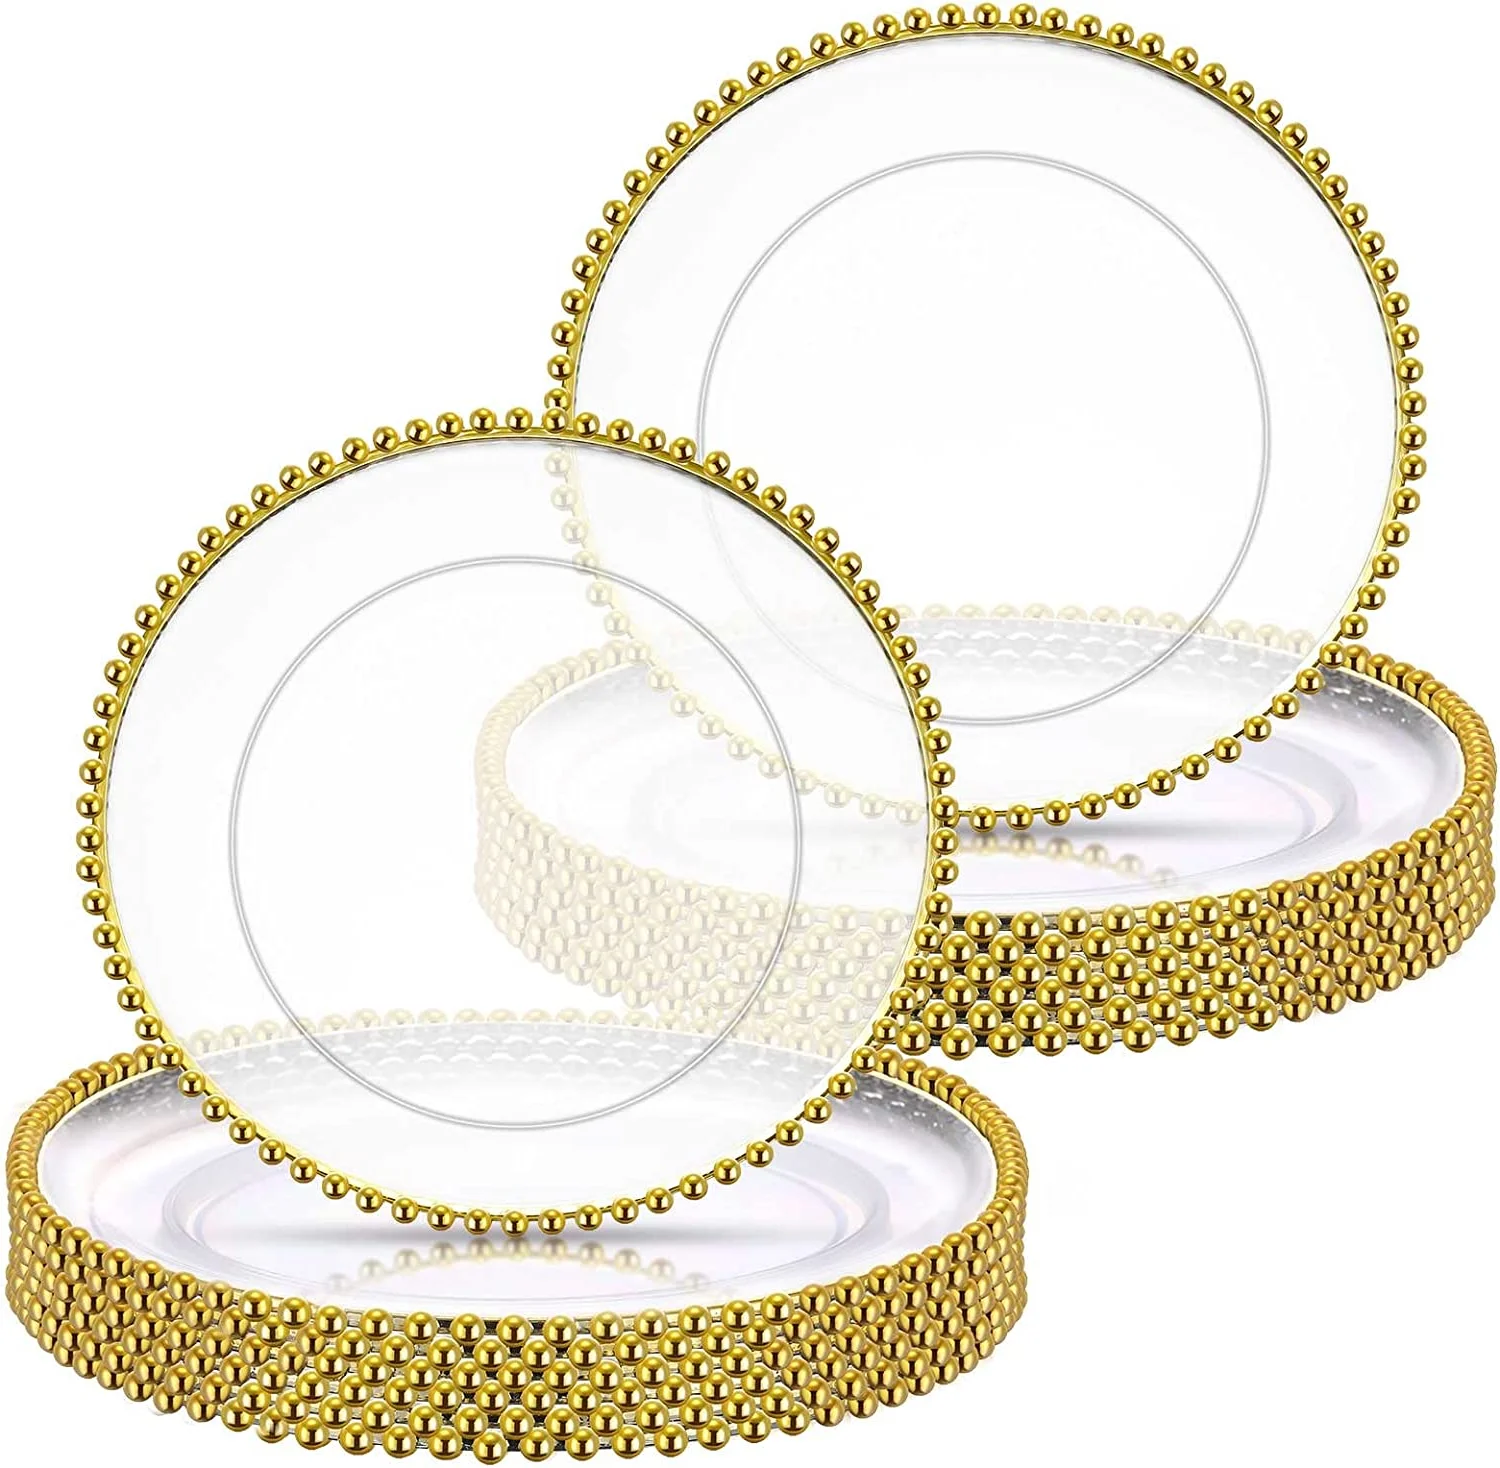 50pcs/100pcs/200pcs Decorative Service Plate with Clear Plastic and Gold Beads Rim for Tableware